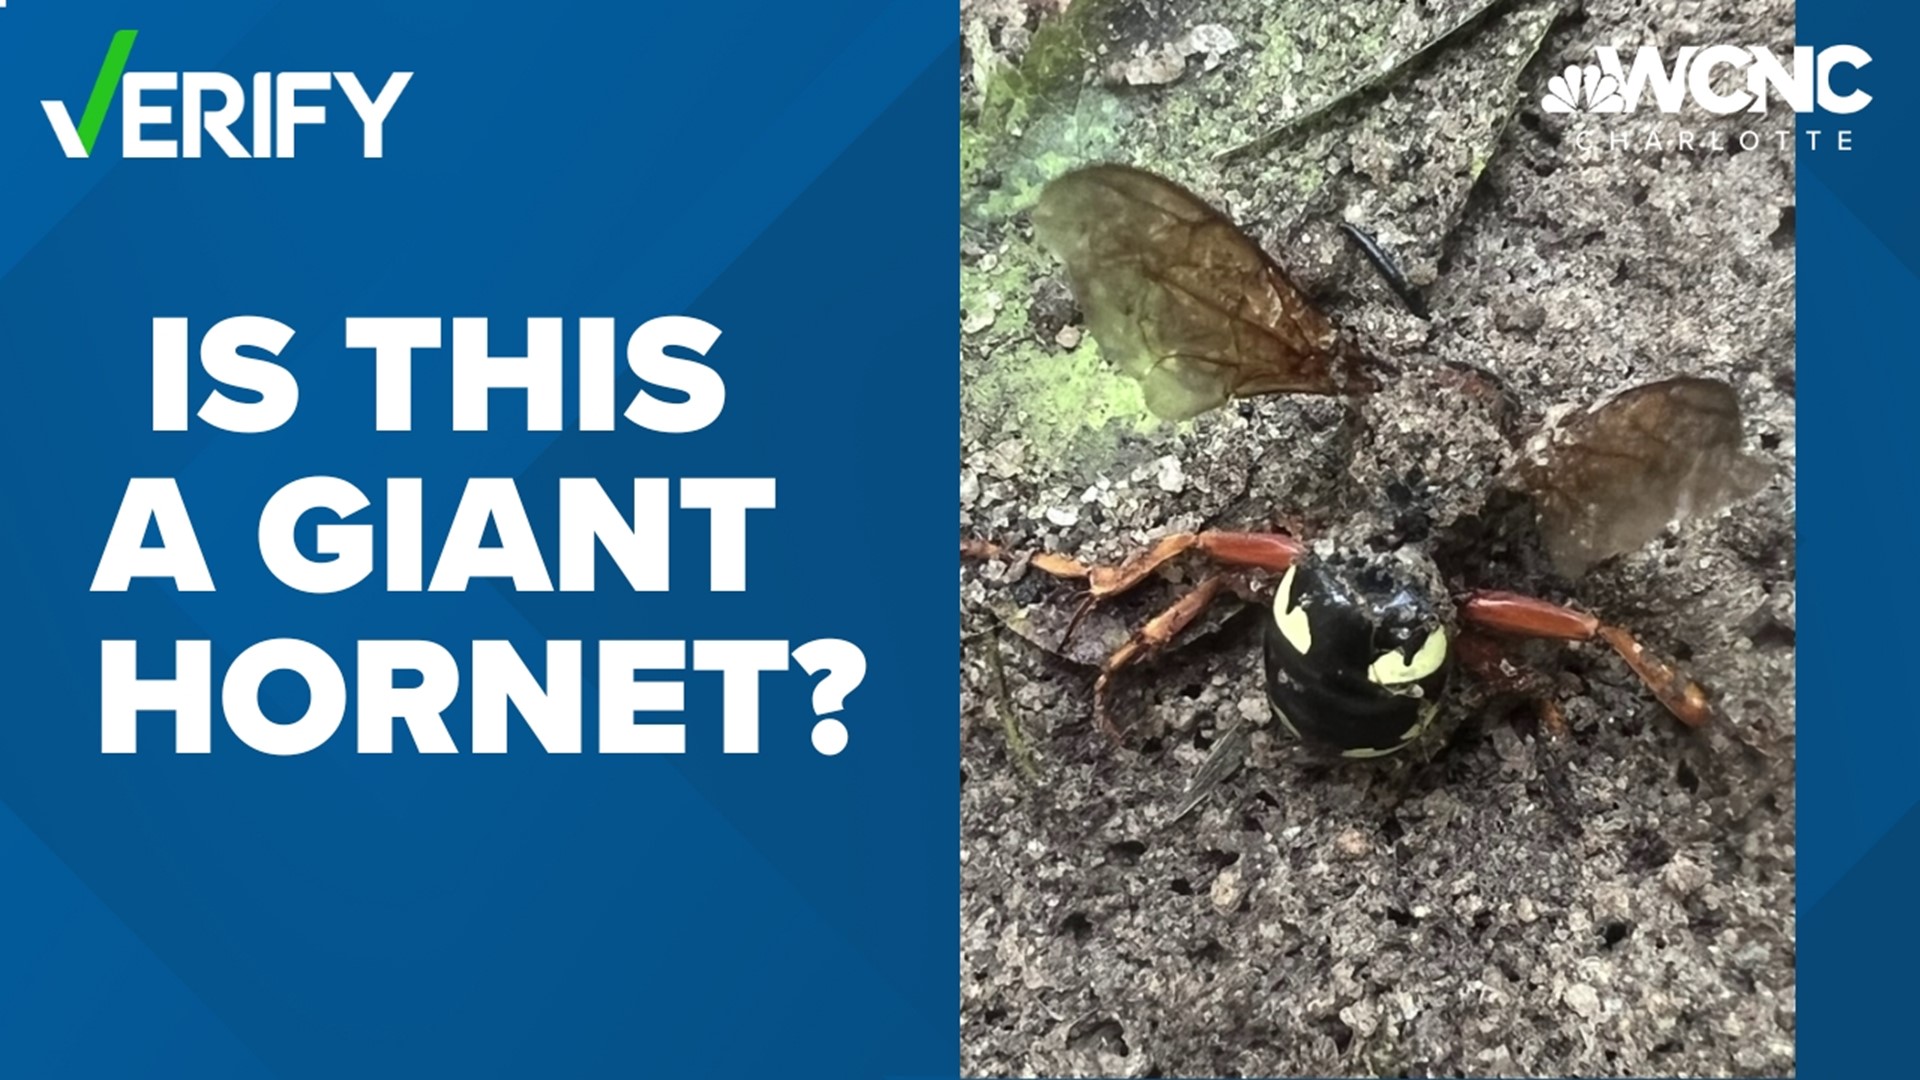 A viewer sent a photo on Twitter, which was recently rebranded as X.com, asking if the bug she just killed with wasp spray was an Asian Giant Hornet.